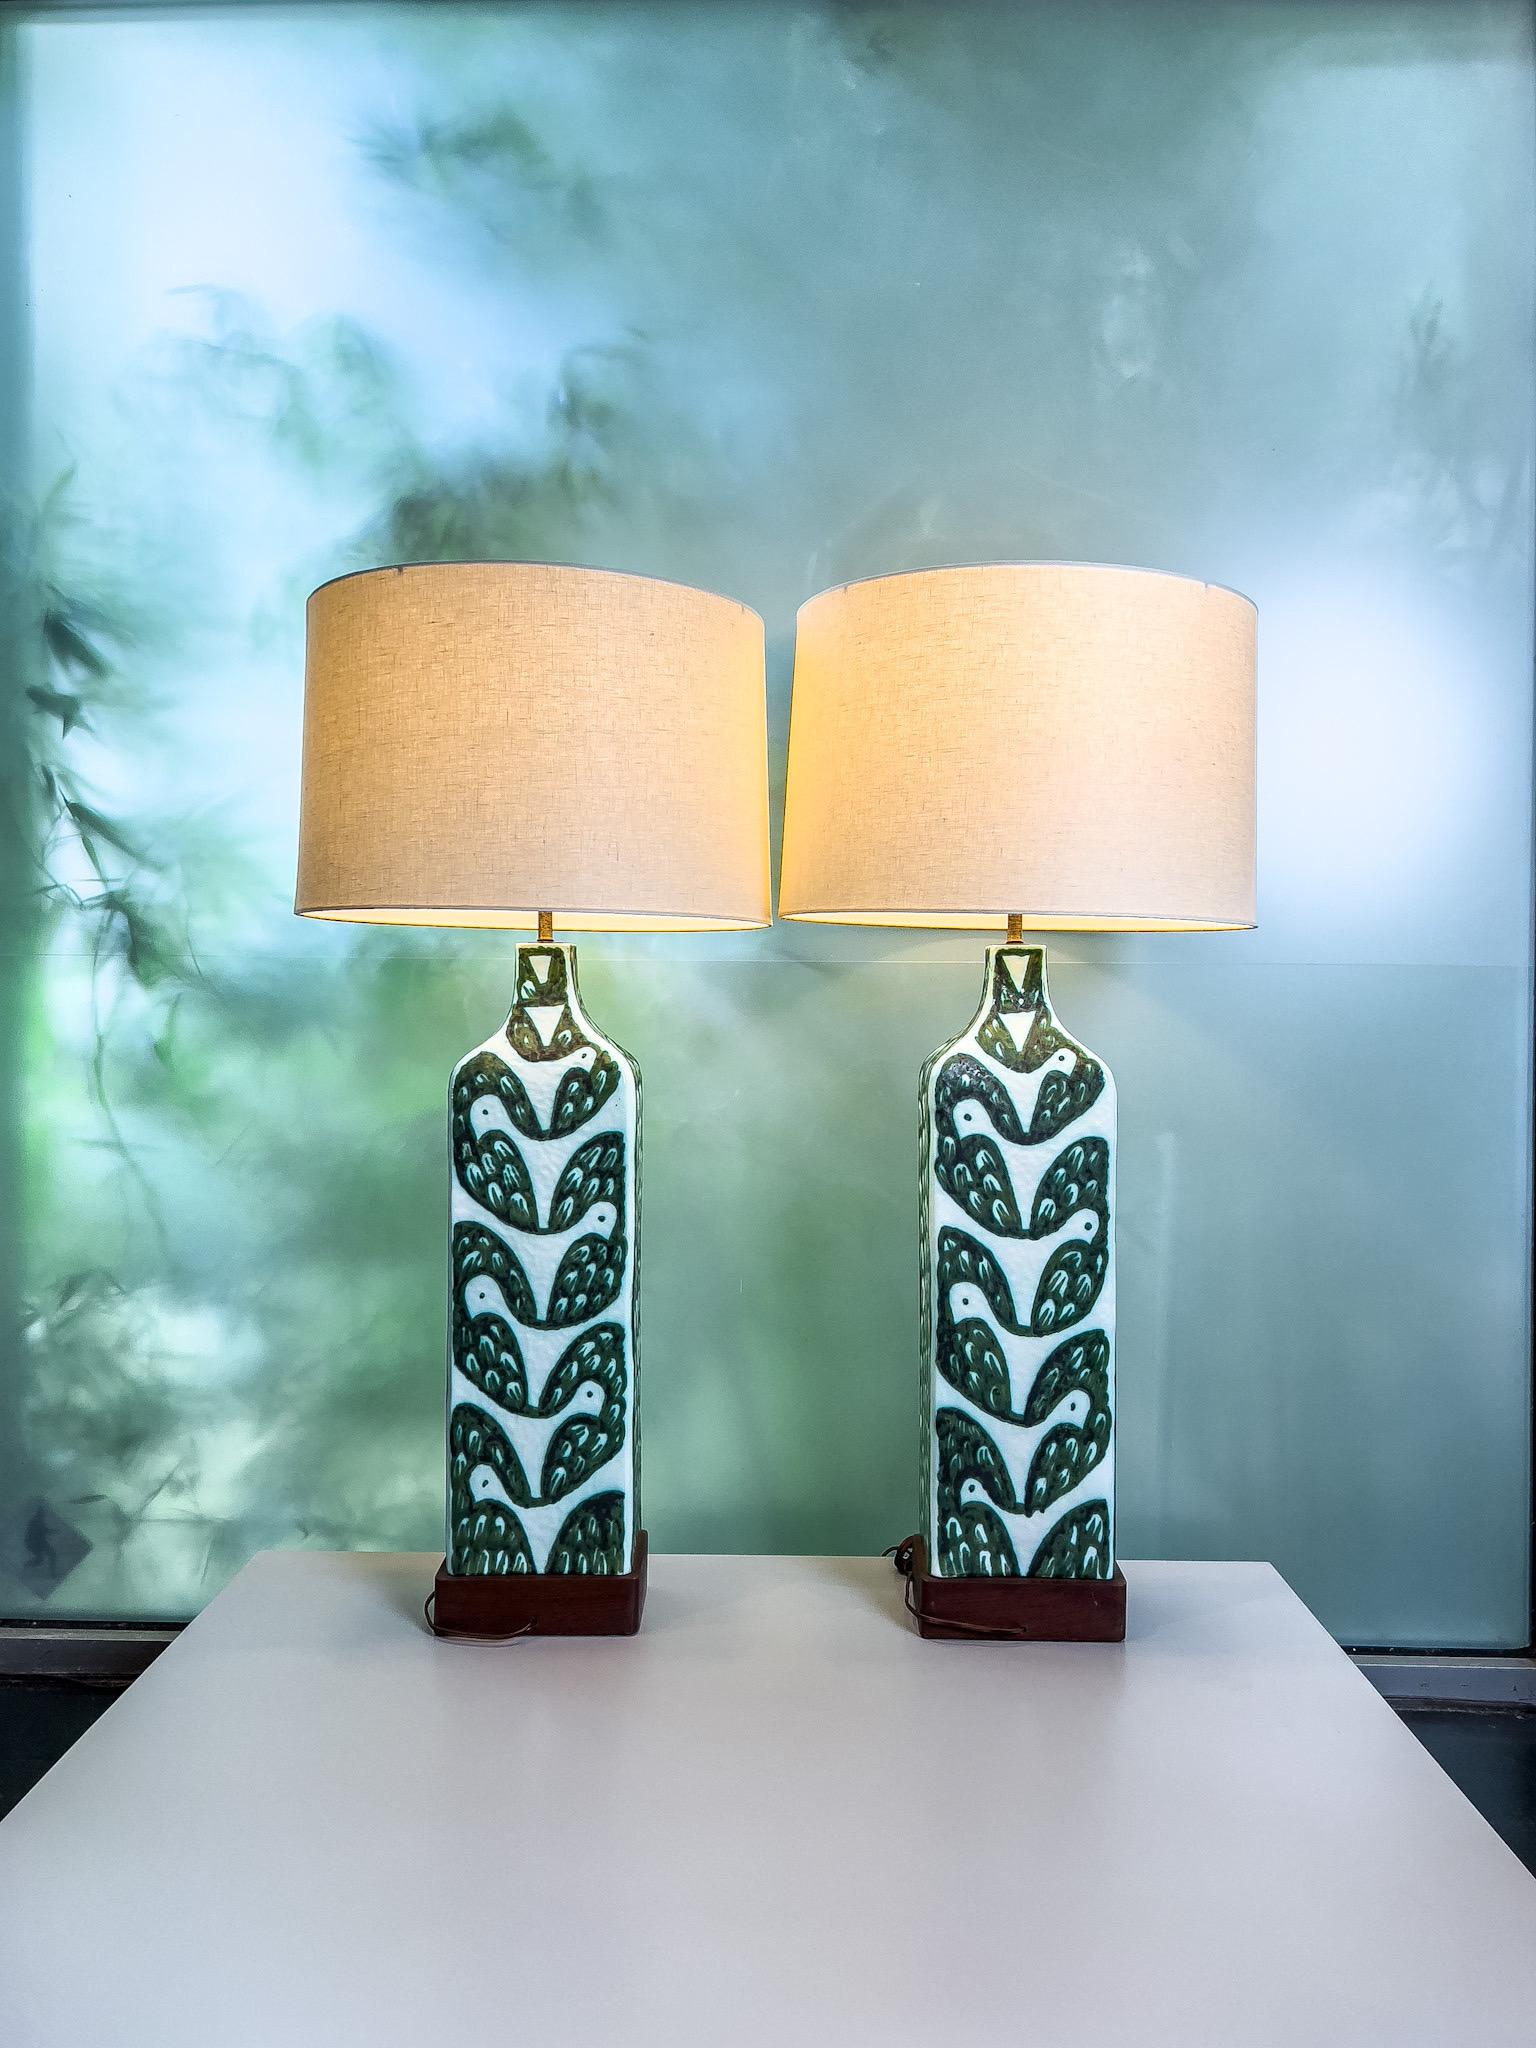 Mid-20th Century Large Pair of Ceramic Lamps by Alessio Tasca for Raymor For Sale